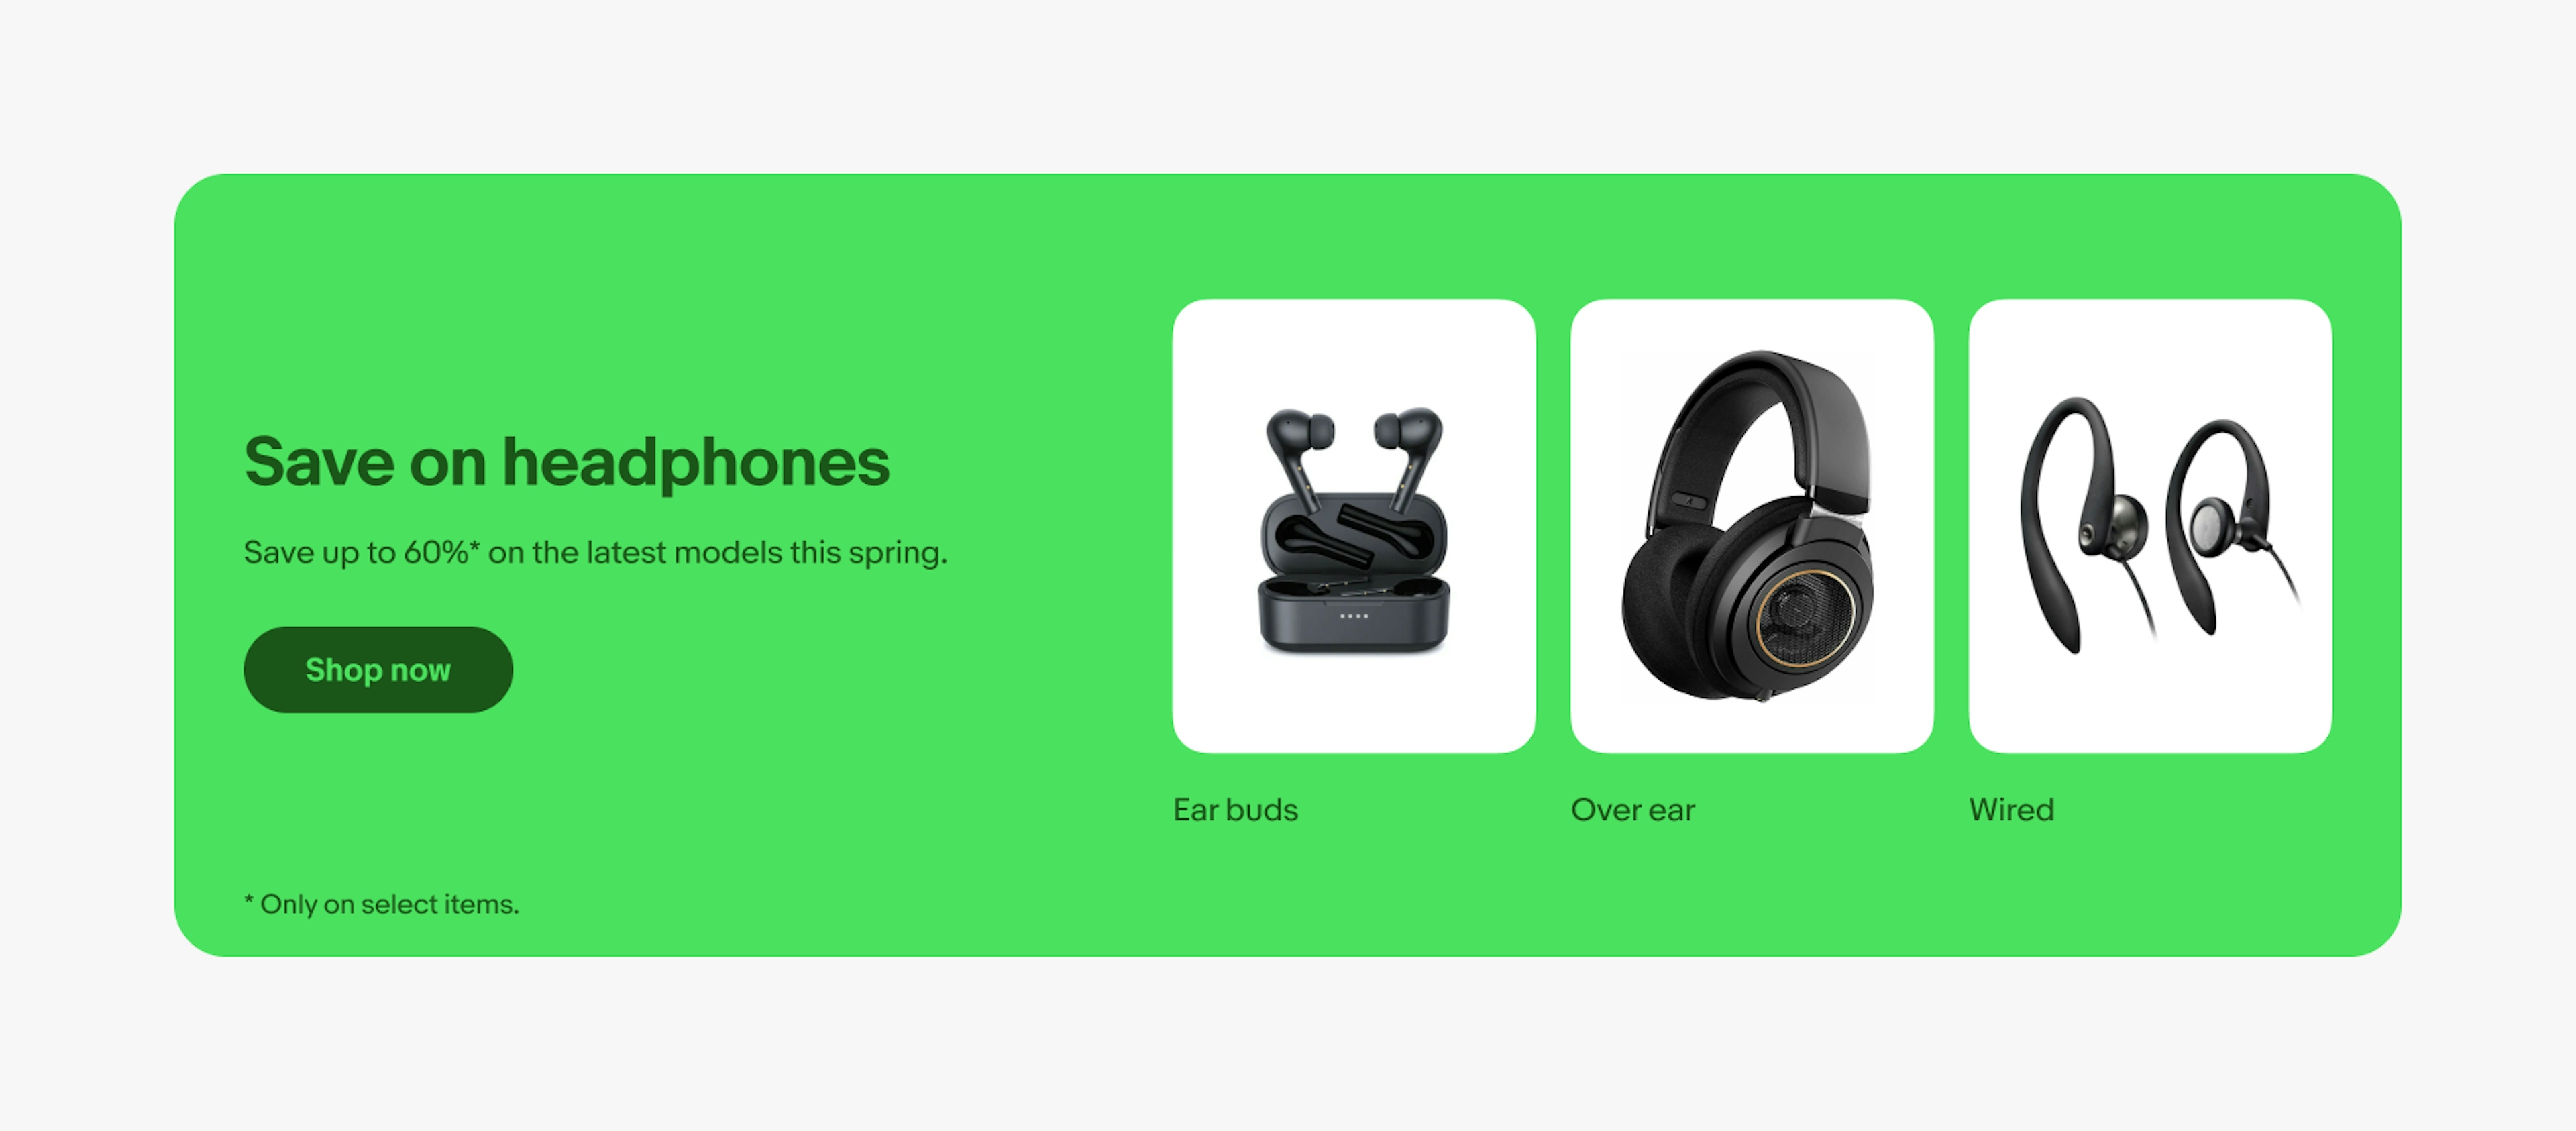 A bright green banner with dark green text centered vertically on the left and 3 images sitting side by side horizontally on the right. Each image has a short string of text underneath it. The first says “earbuds” with a photo of earbuds. The second says, “over ear” with a photo of over ear headphones. The third says “wired” with a photo of wired over ear earbuds.